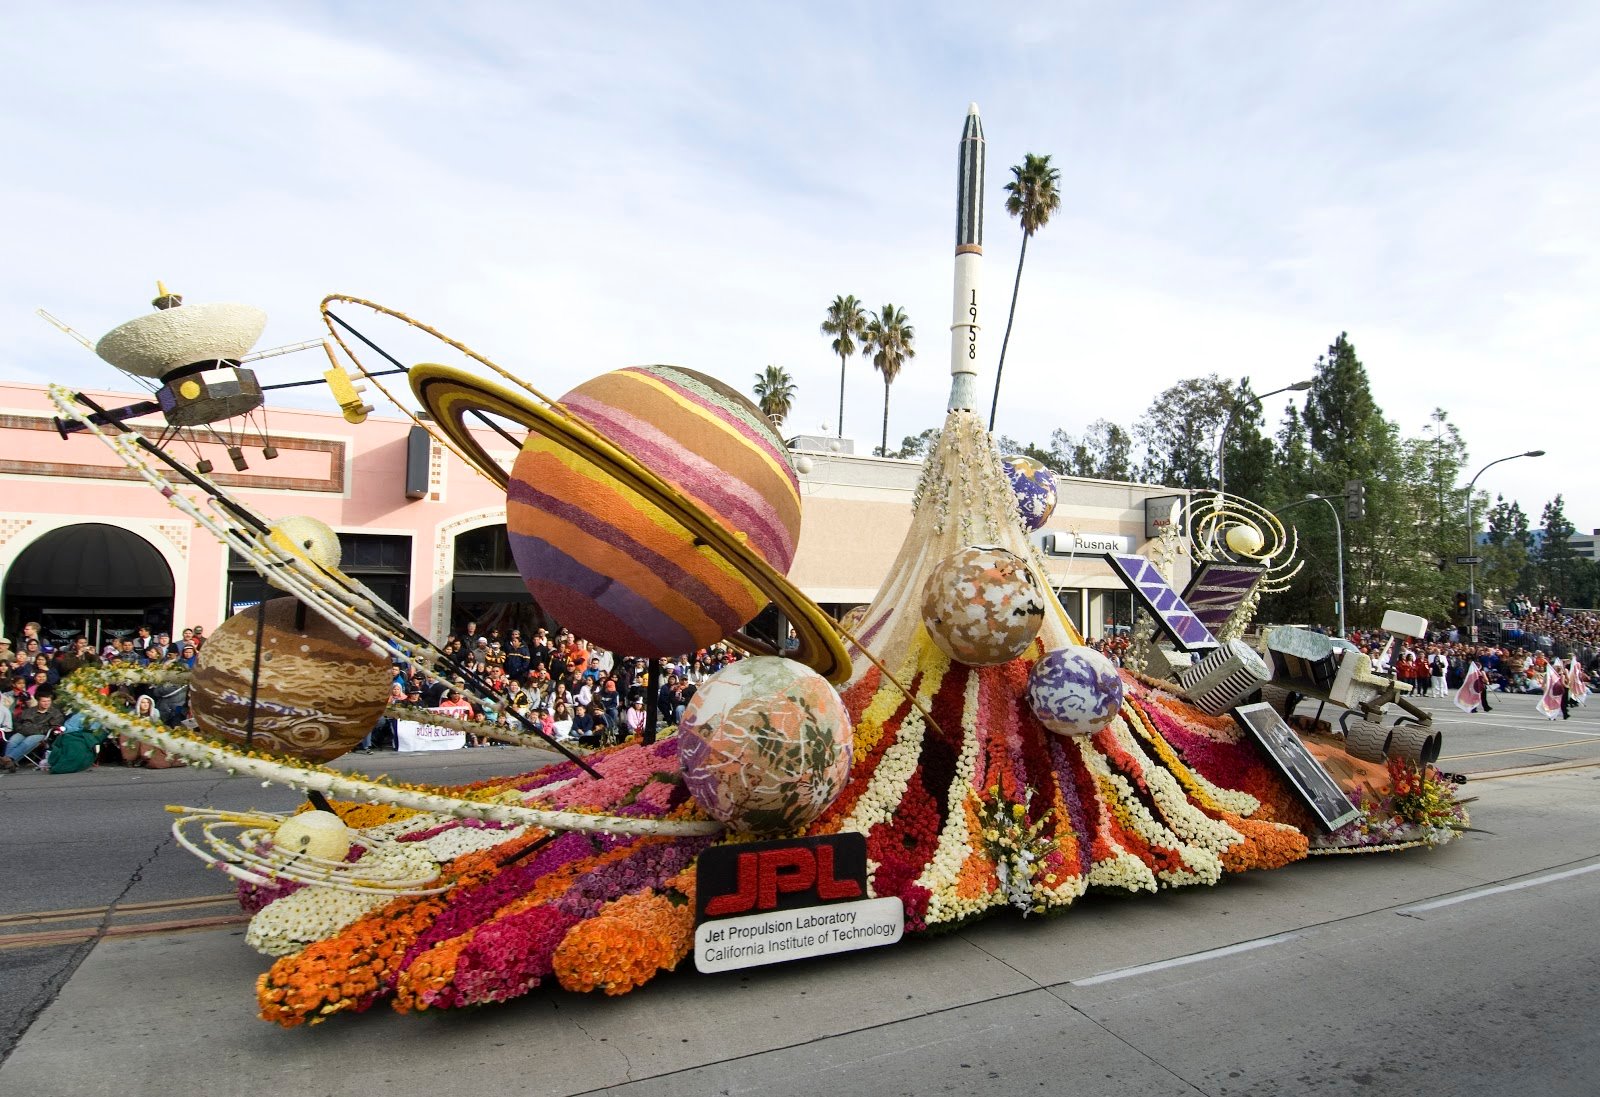 Countdown To Launch Of Jet Propulsion Lab%2C Celebrating 50 Yrs Of Space Exploration%2C Rose Parade Float 